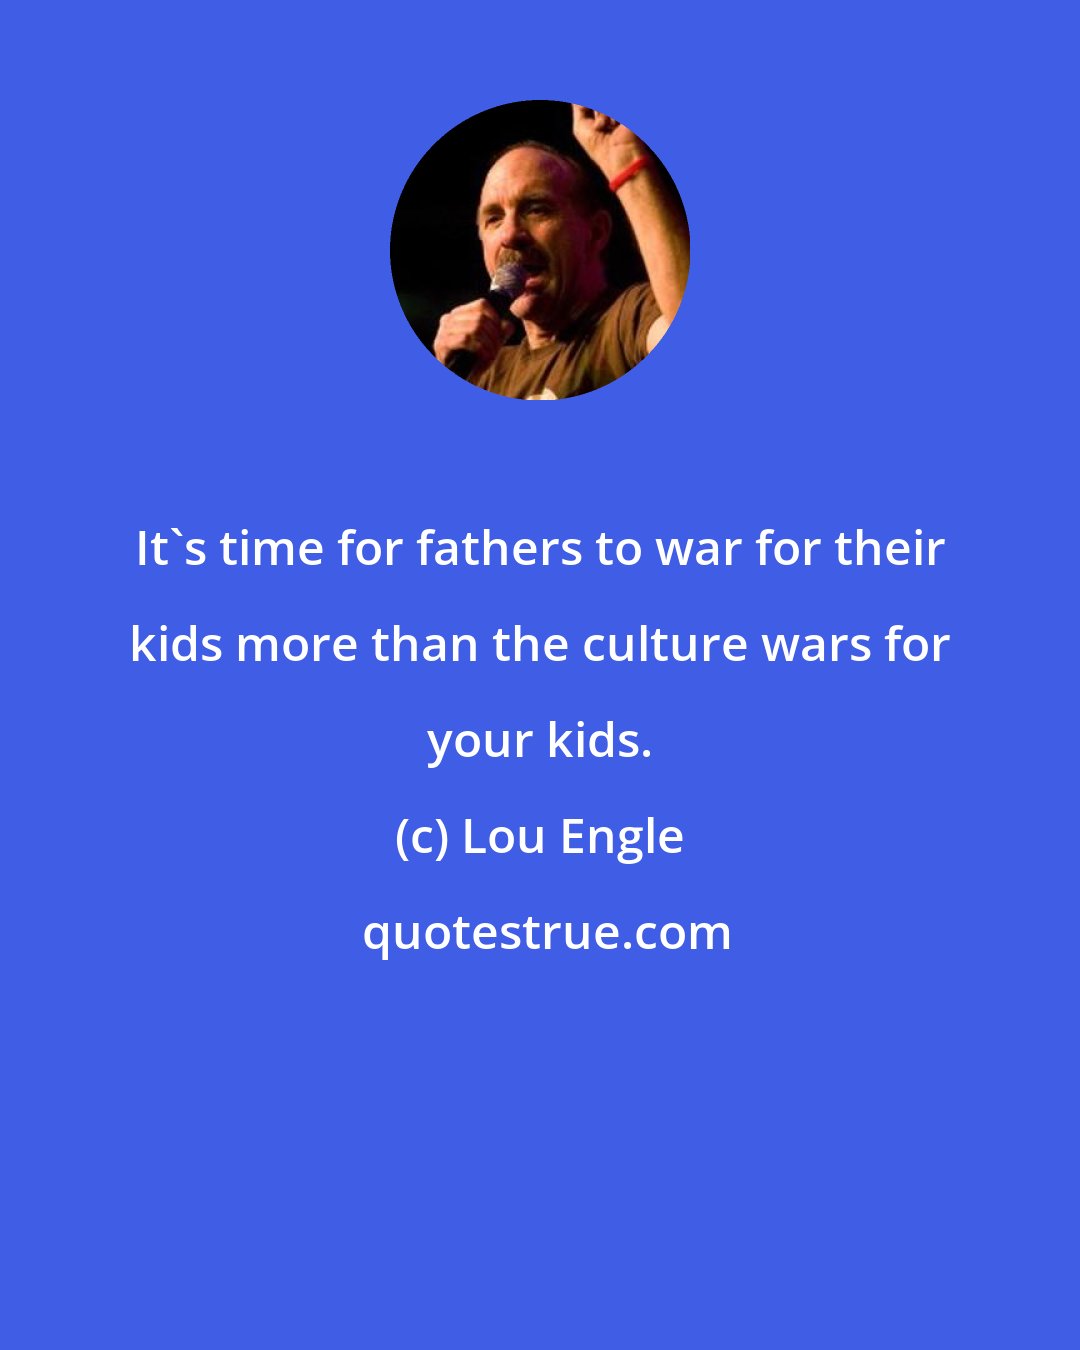 Lou Engle: It's time for fathers to war for their kids more than the culture wars for your kids.